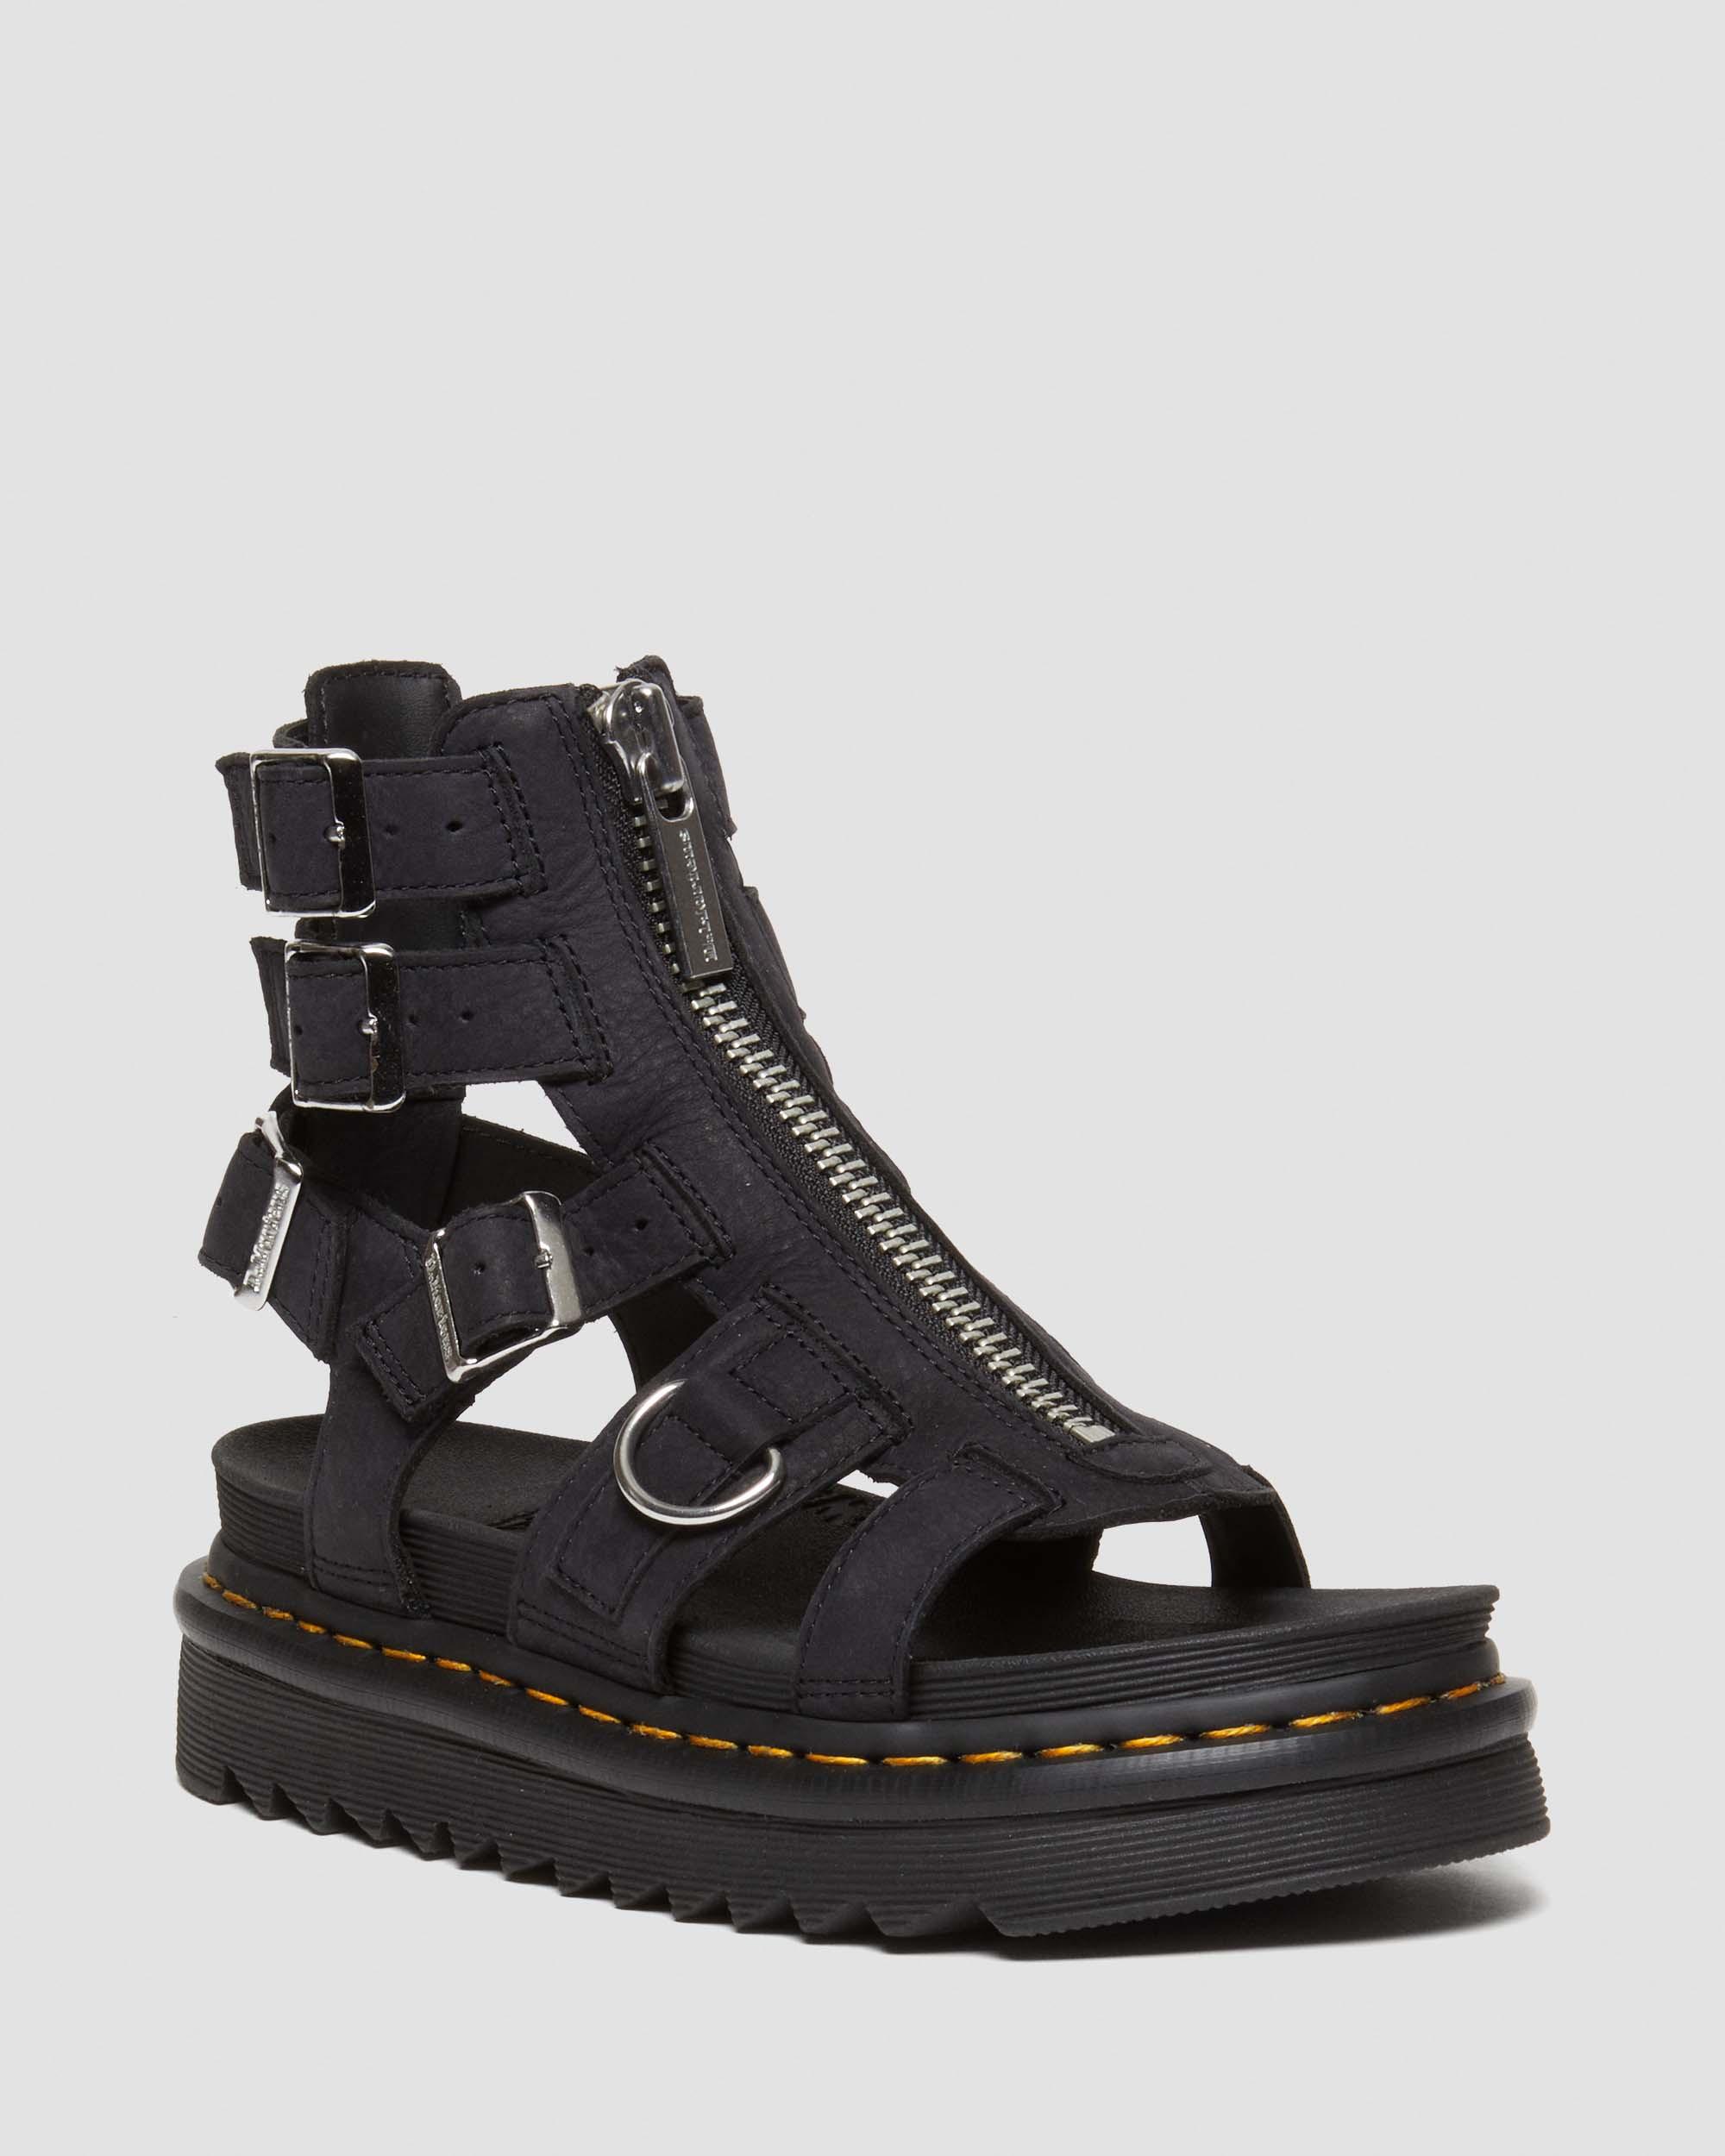 Olson Tumbled Nubuck Leather Gladiator Zip Sandals in Charcoal Grey